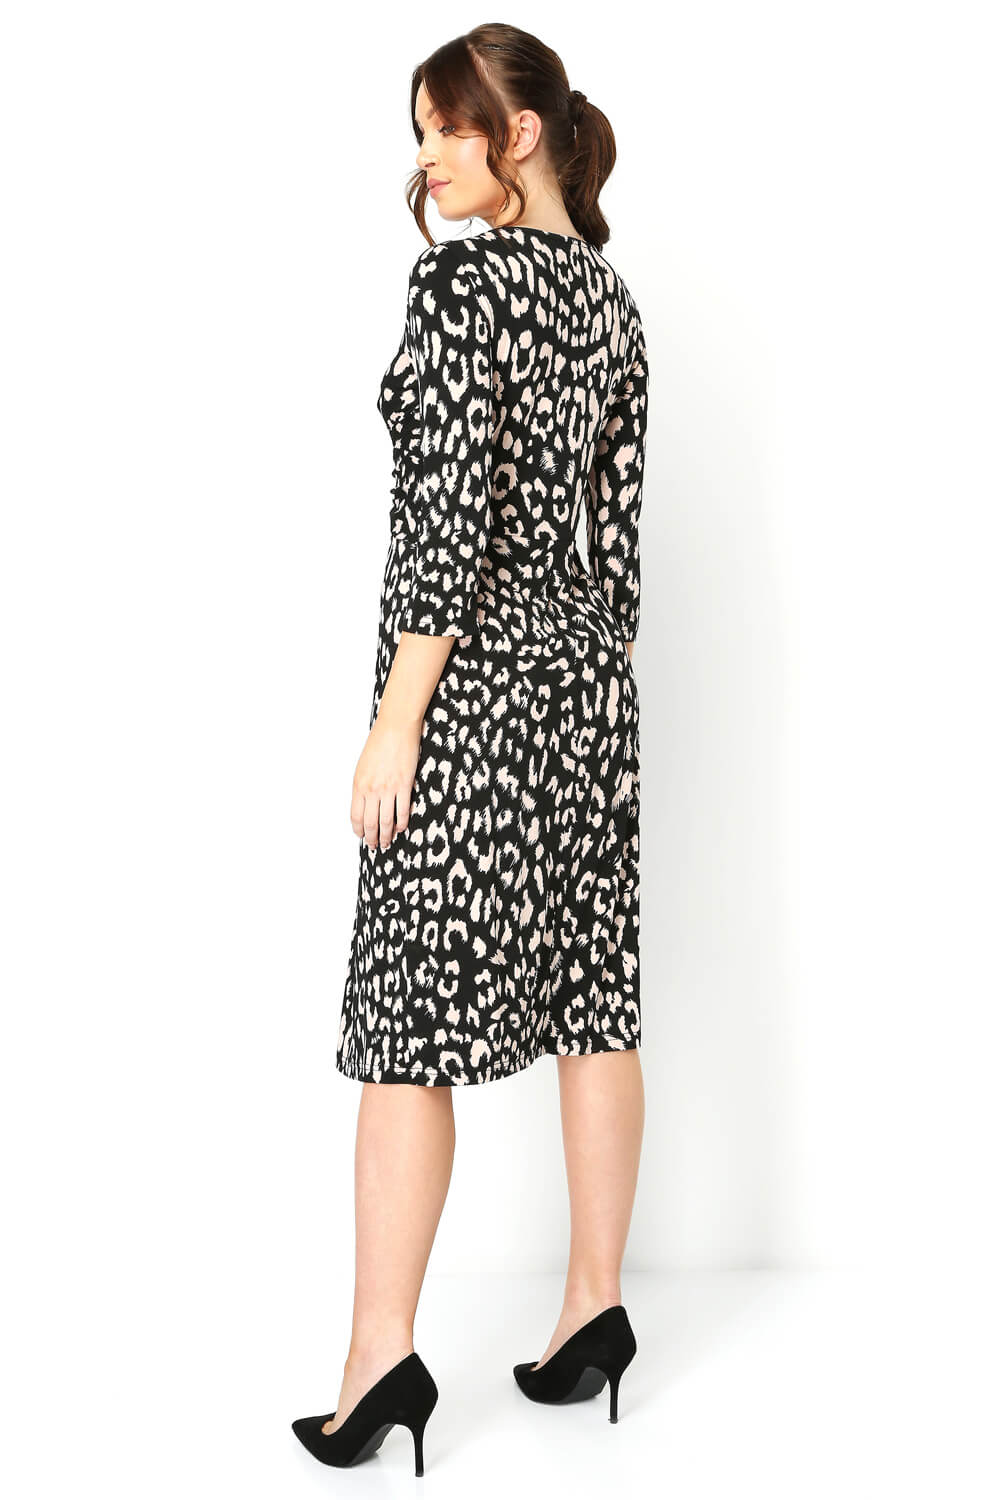 Light Pink Animal Print Fit And Flare Dress, Image 3 of 5